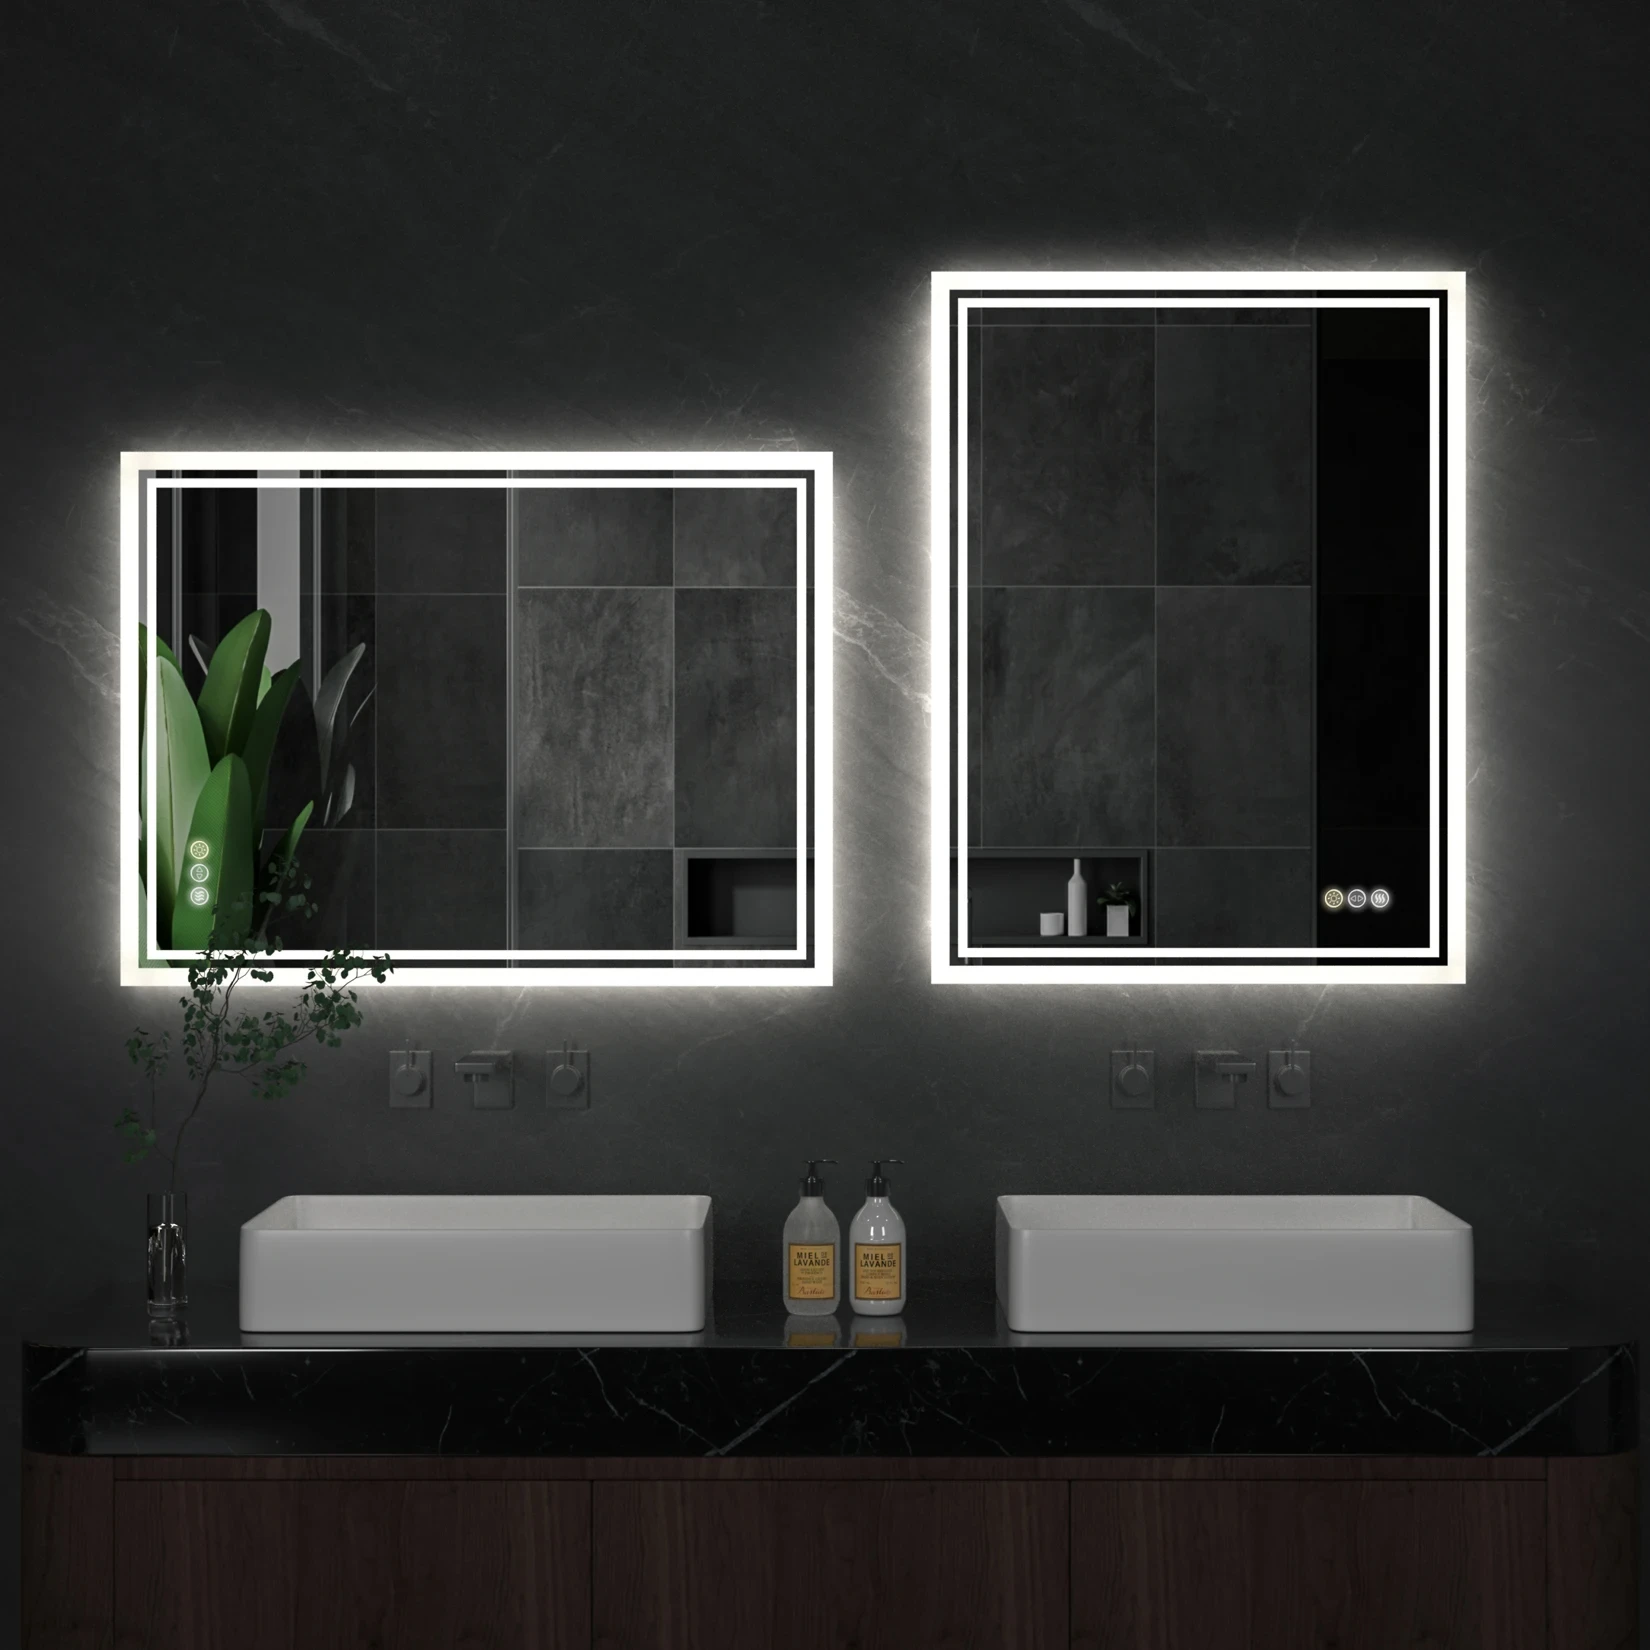 

Square LED Backlit Mirror Bathroom Vanity with Lights,Anti-Fog,Dimmable,CRI90+,Touch Button,Water Proof,Horizontal/Vertical